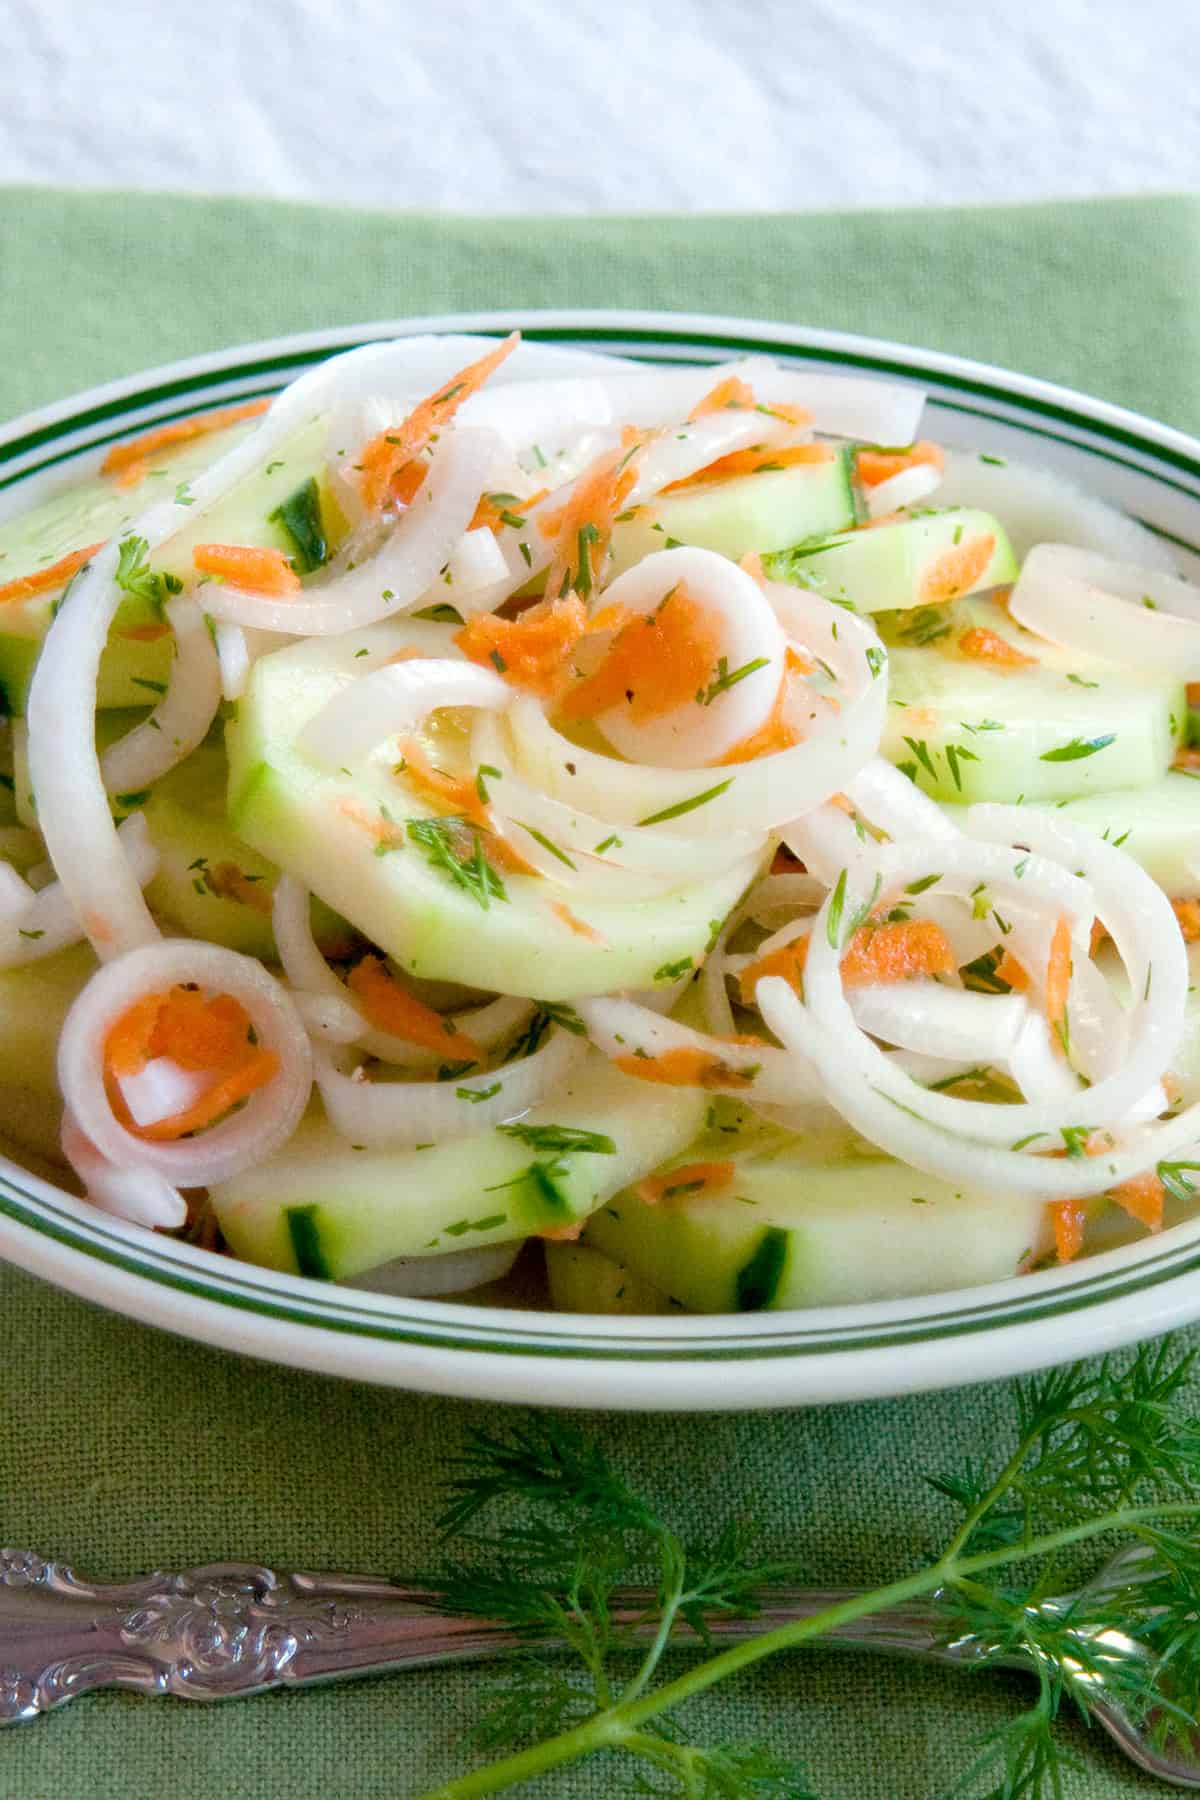 Sweet and sour cucumber salad in a bowl with a green napkin to the side.